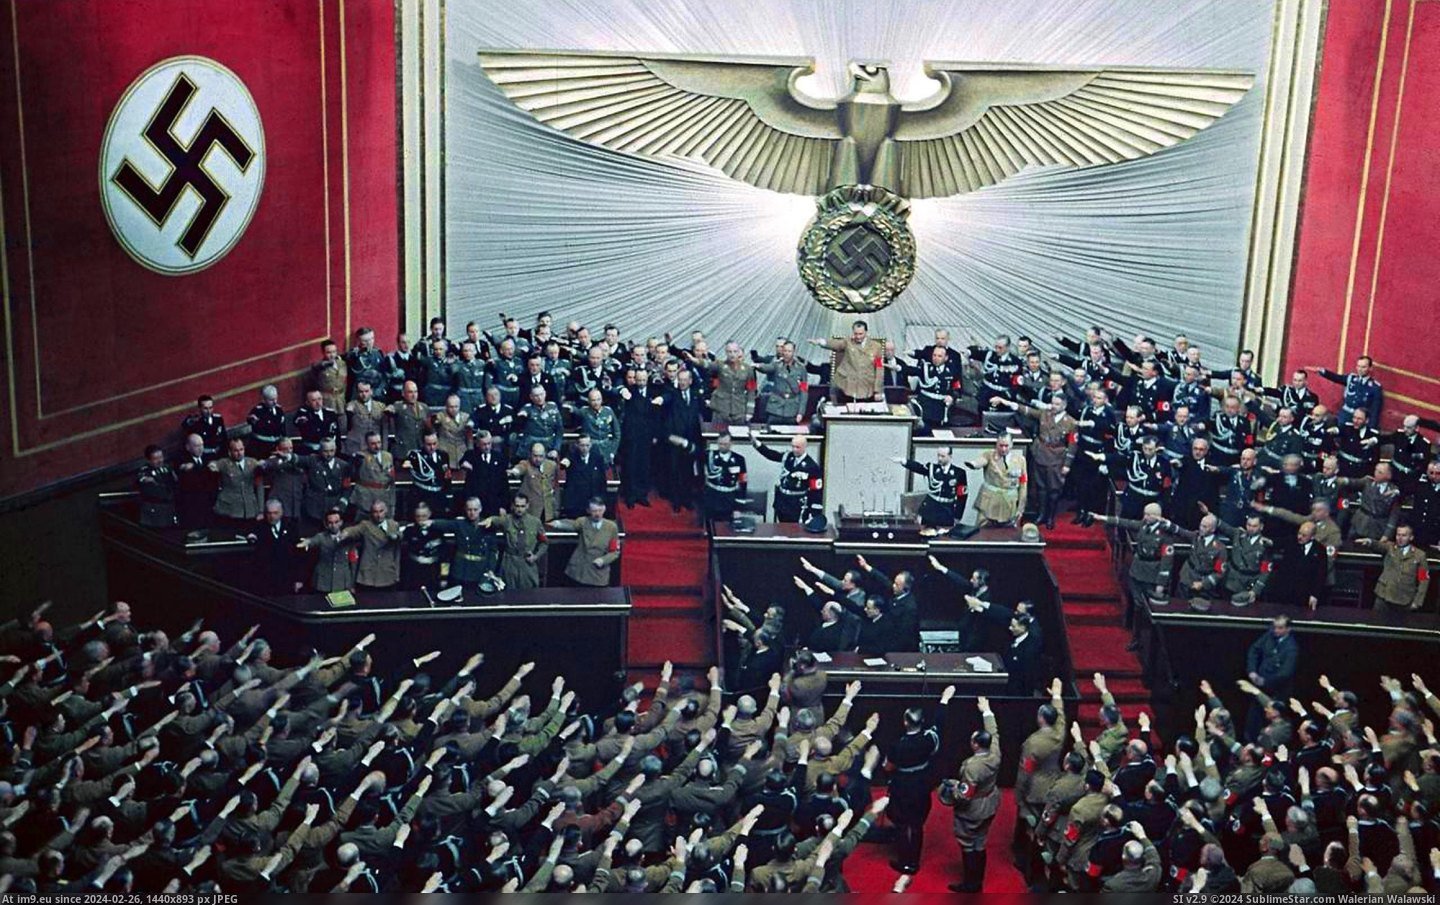 #Salute #D4xil72 #Themistrunsred #Reichstag Reichstag Salute By Themistrunsred D4Xil72 Pic. (Изображение из альбом Historical photos of nazi Germany))